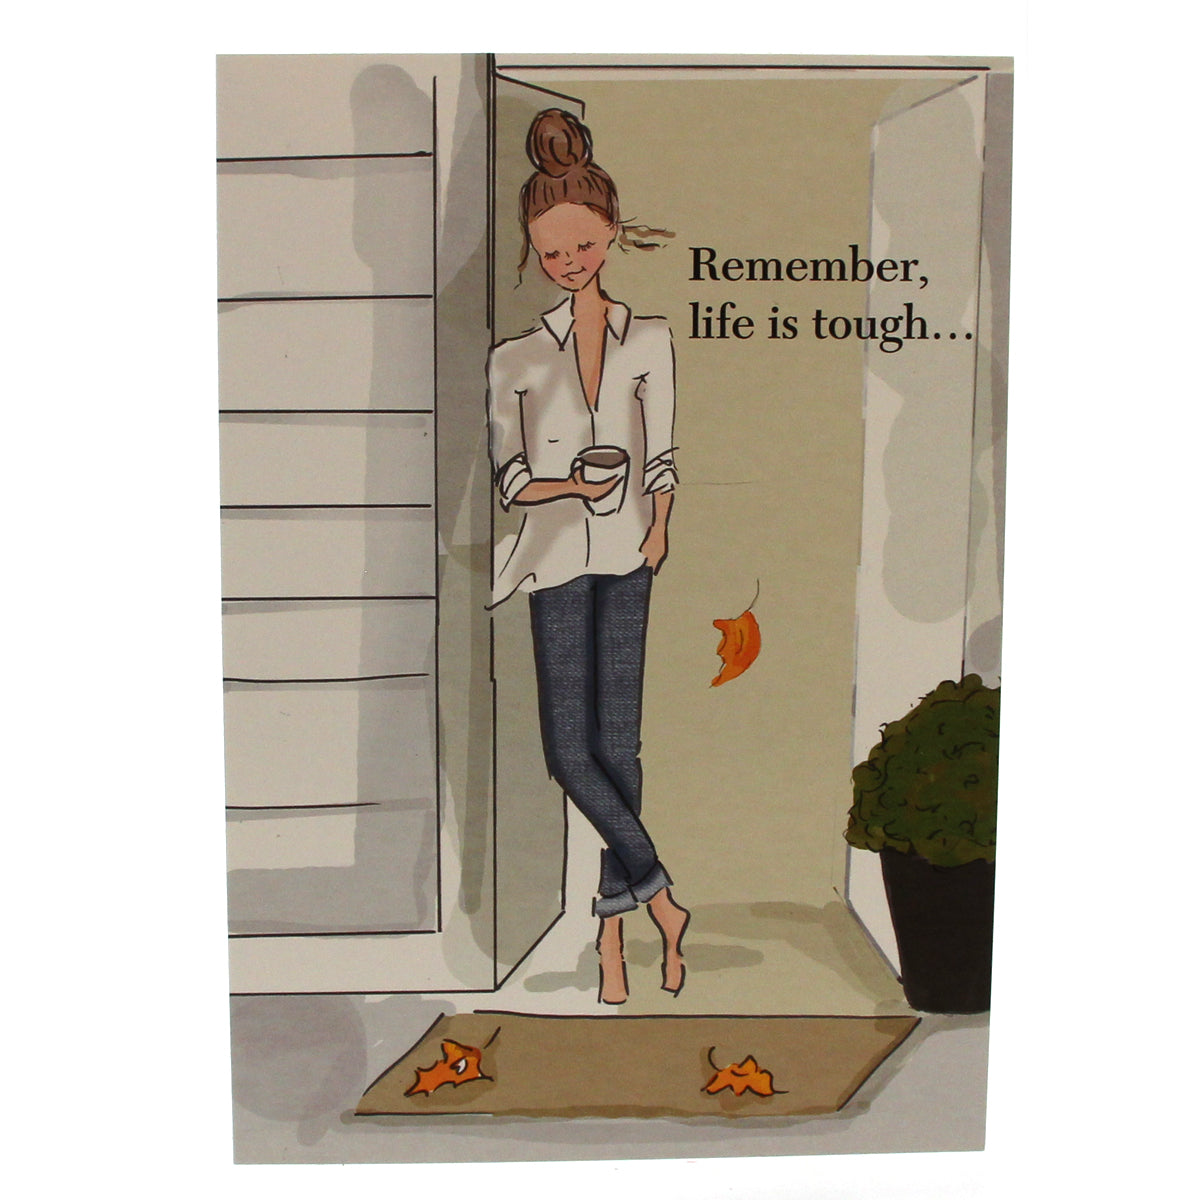 Encouragement Card: Remember, life is tough...